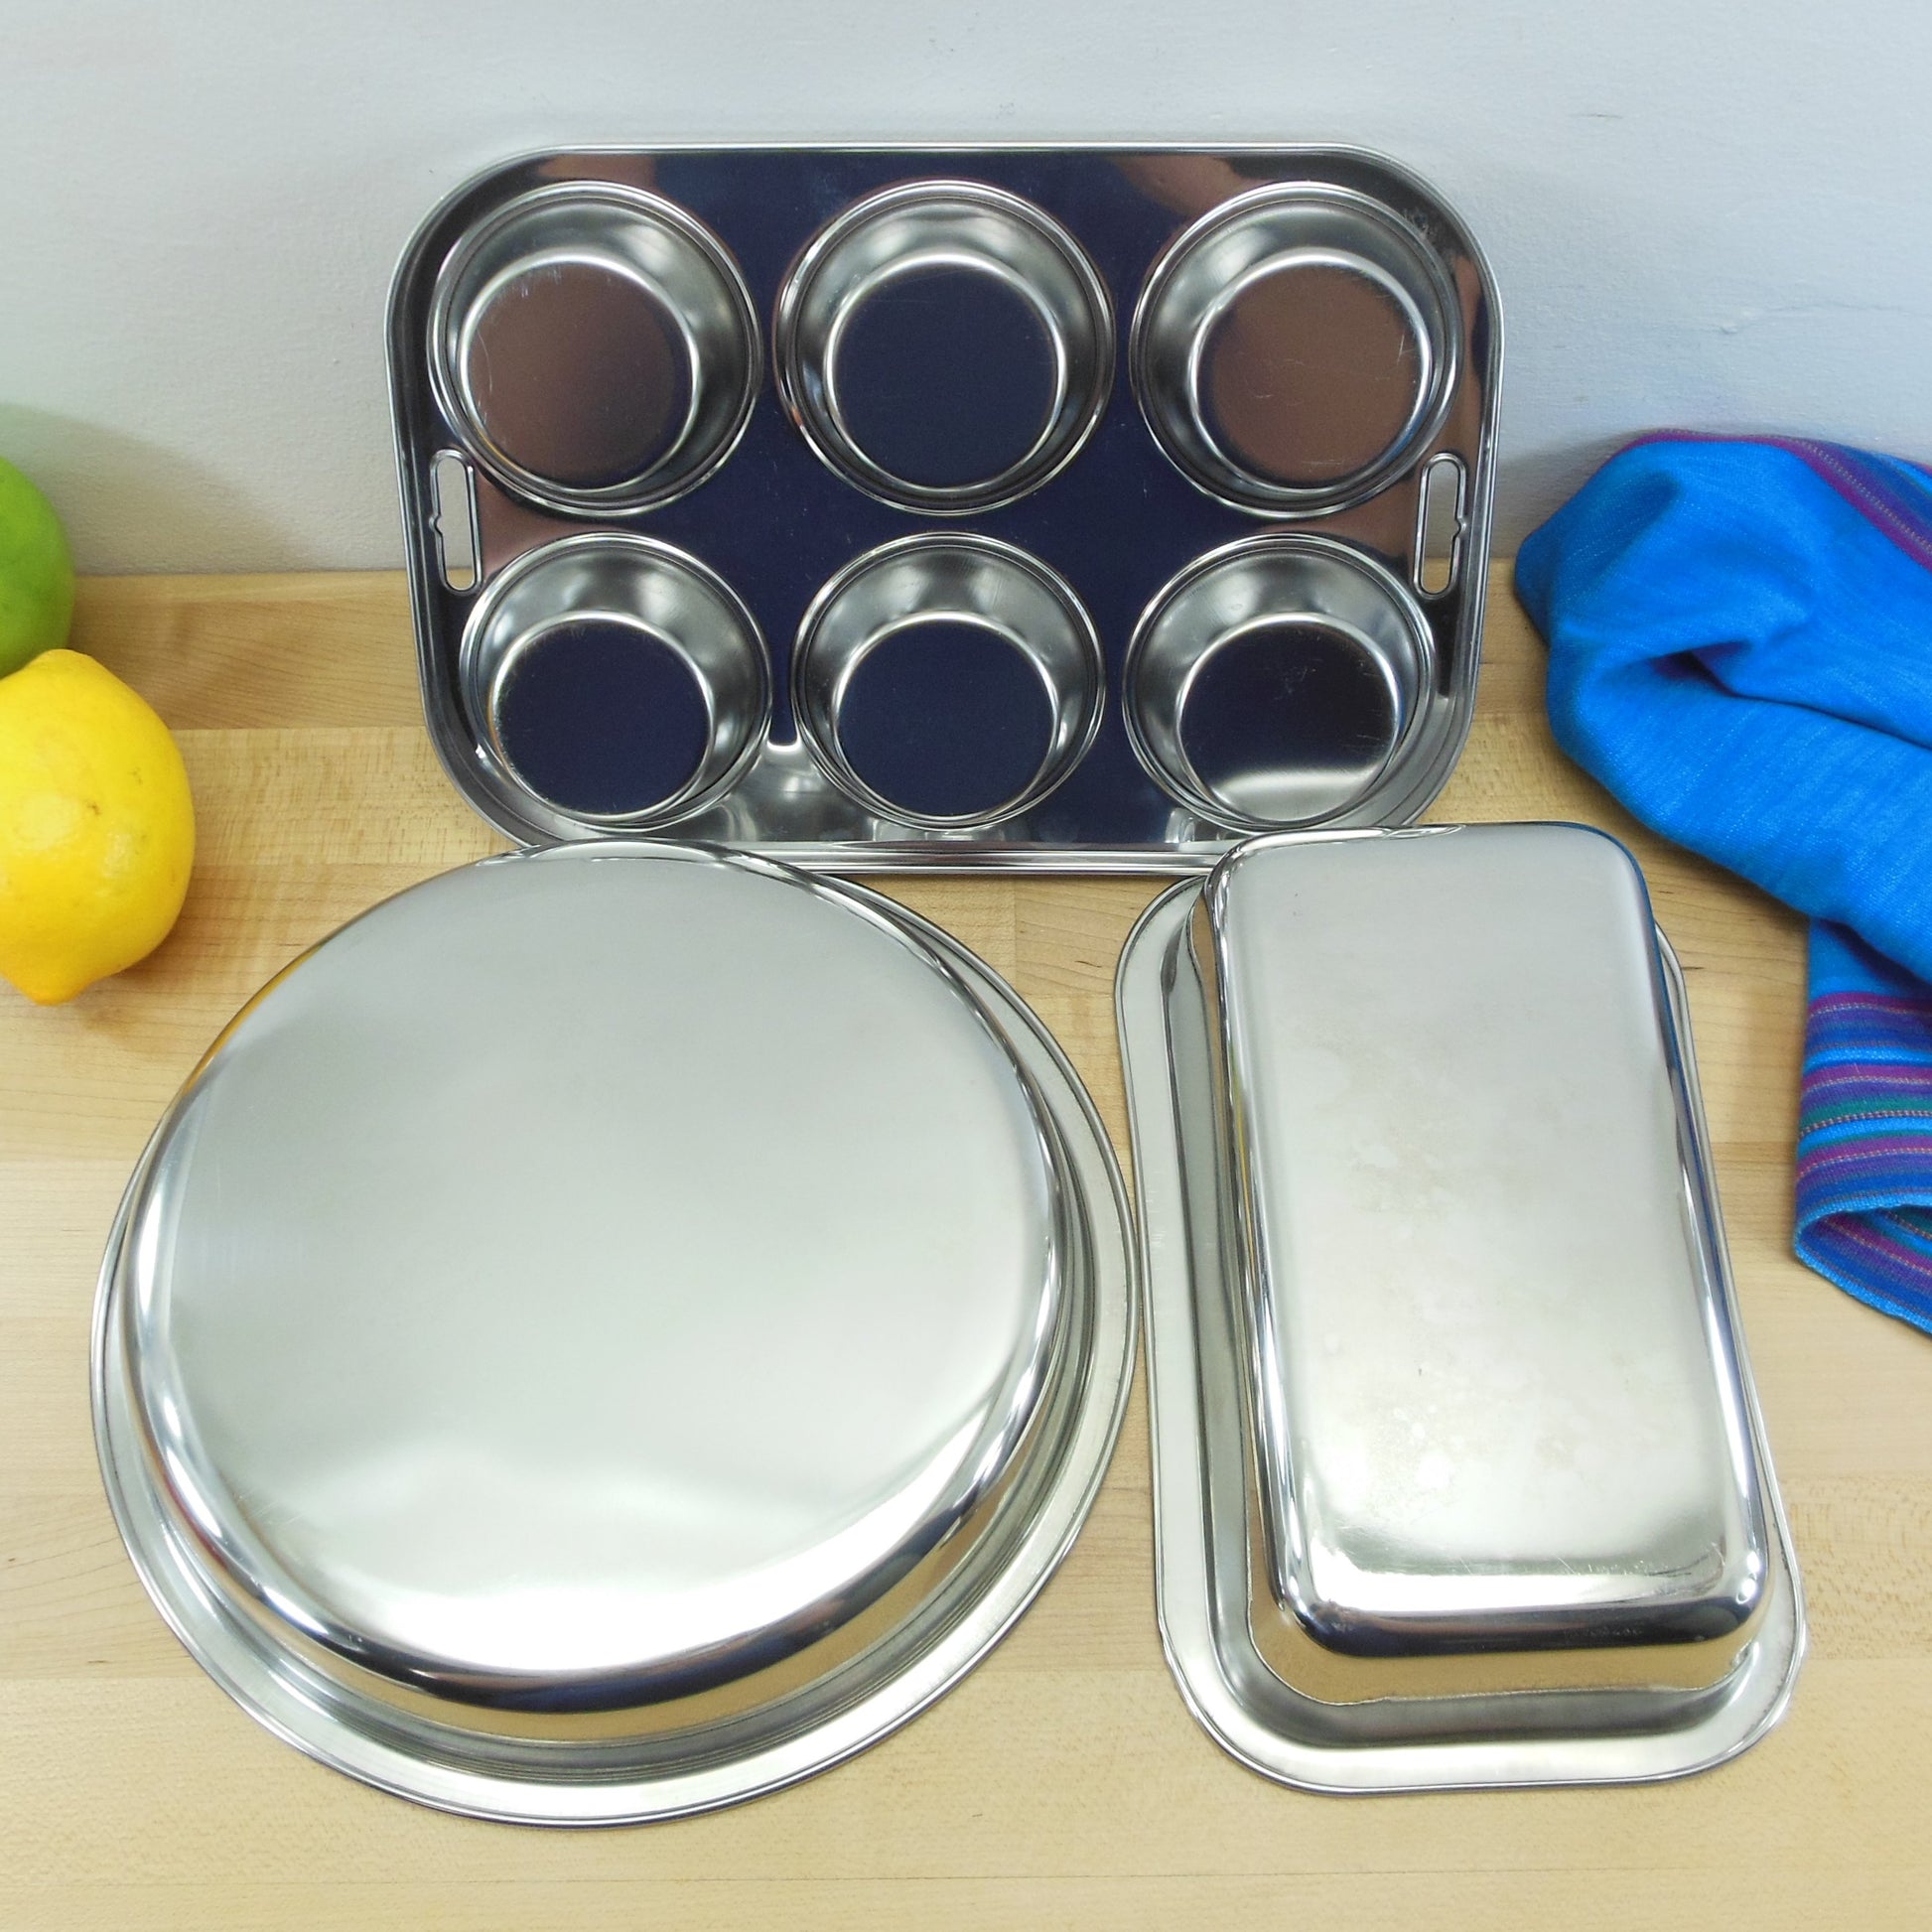 Mirror Stainless Steel Unbranded Trio Cake/Pie, Loaf & Muffin Pans Unbranded